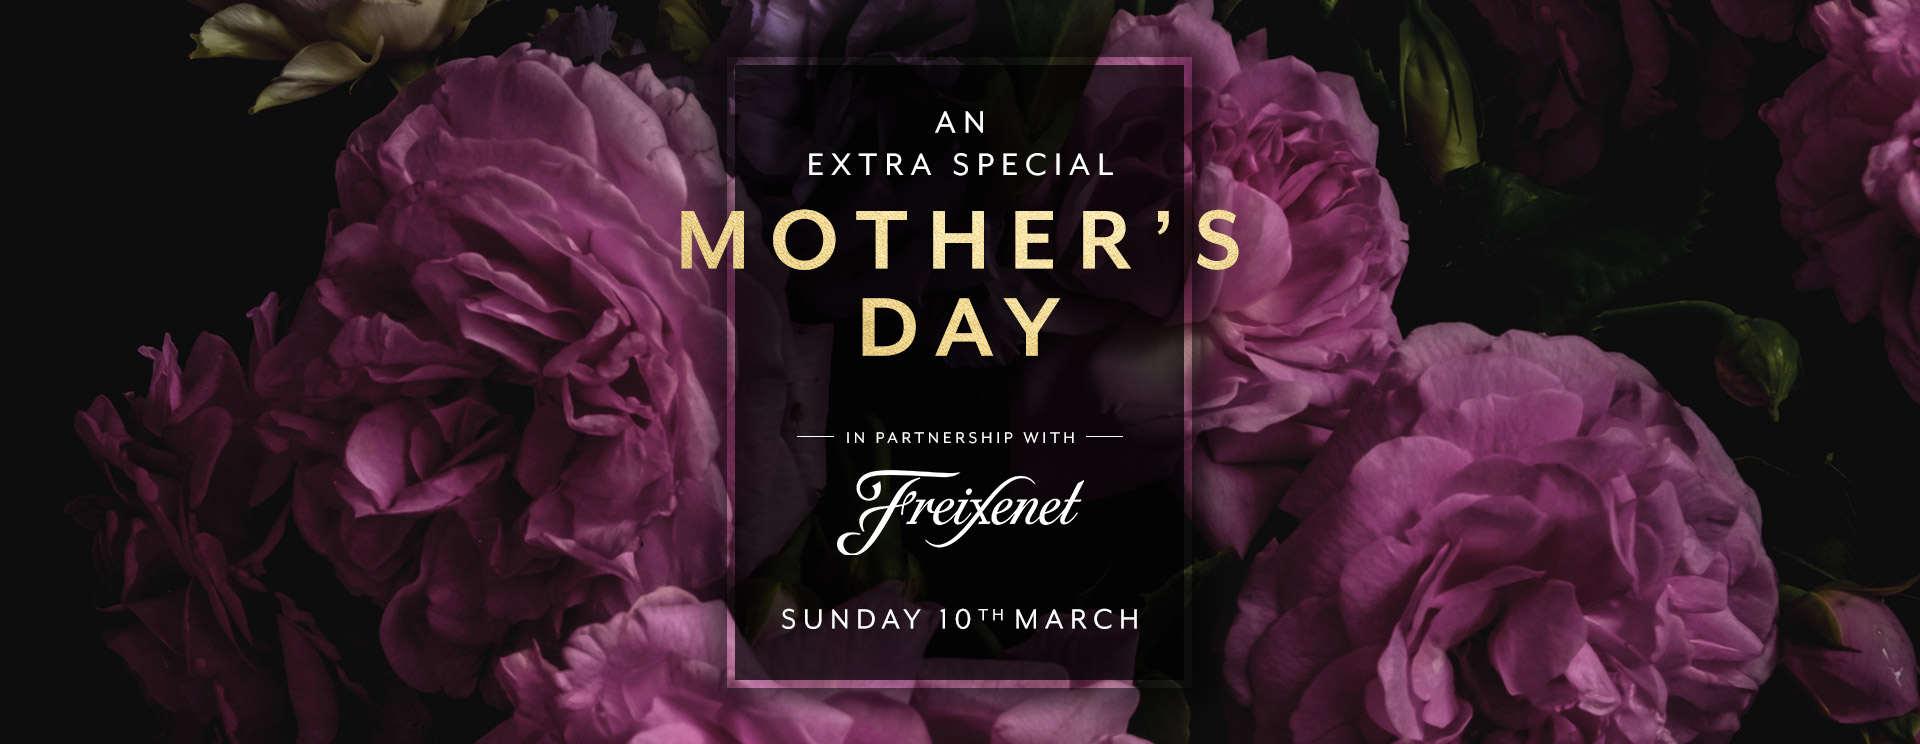 Mother’s Day menu/meal in Waltham Cross